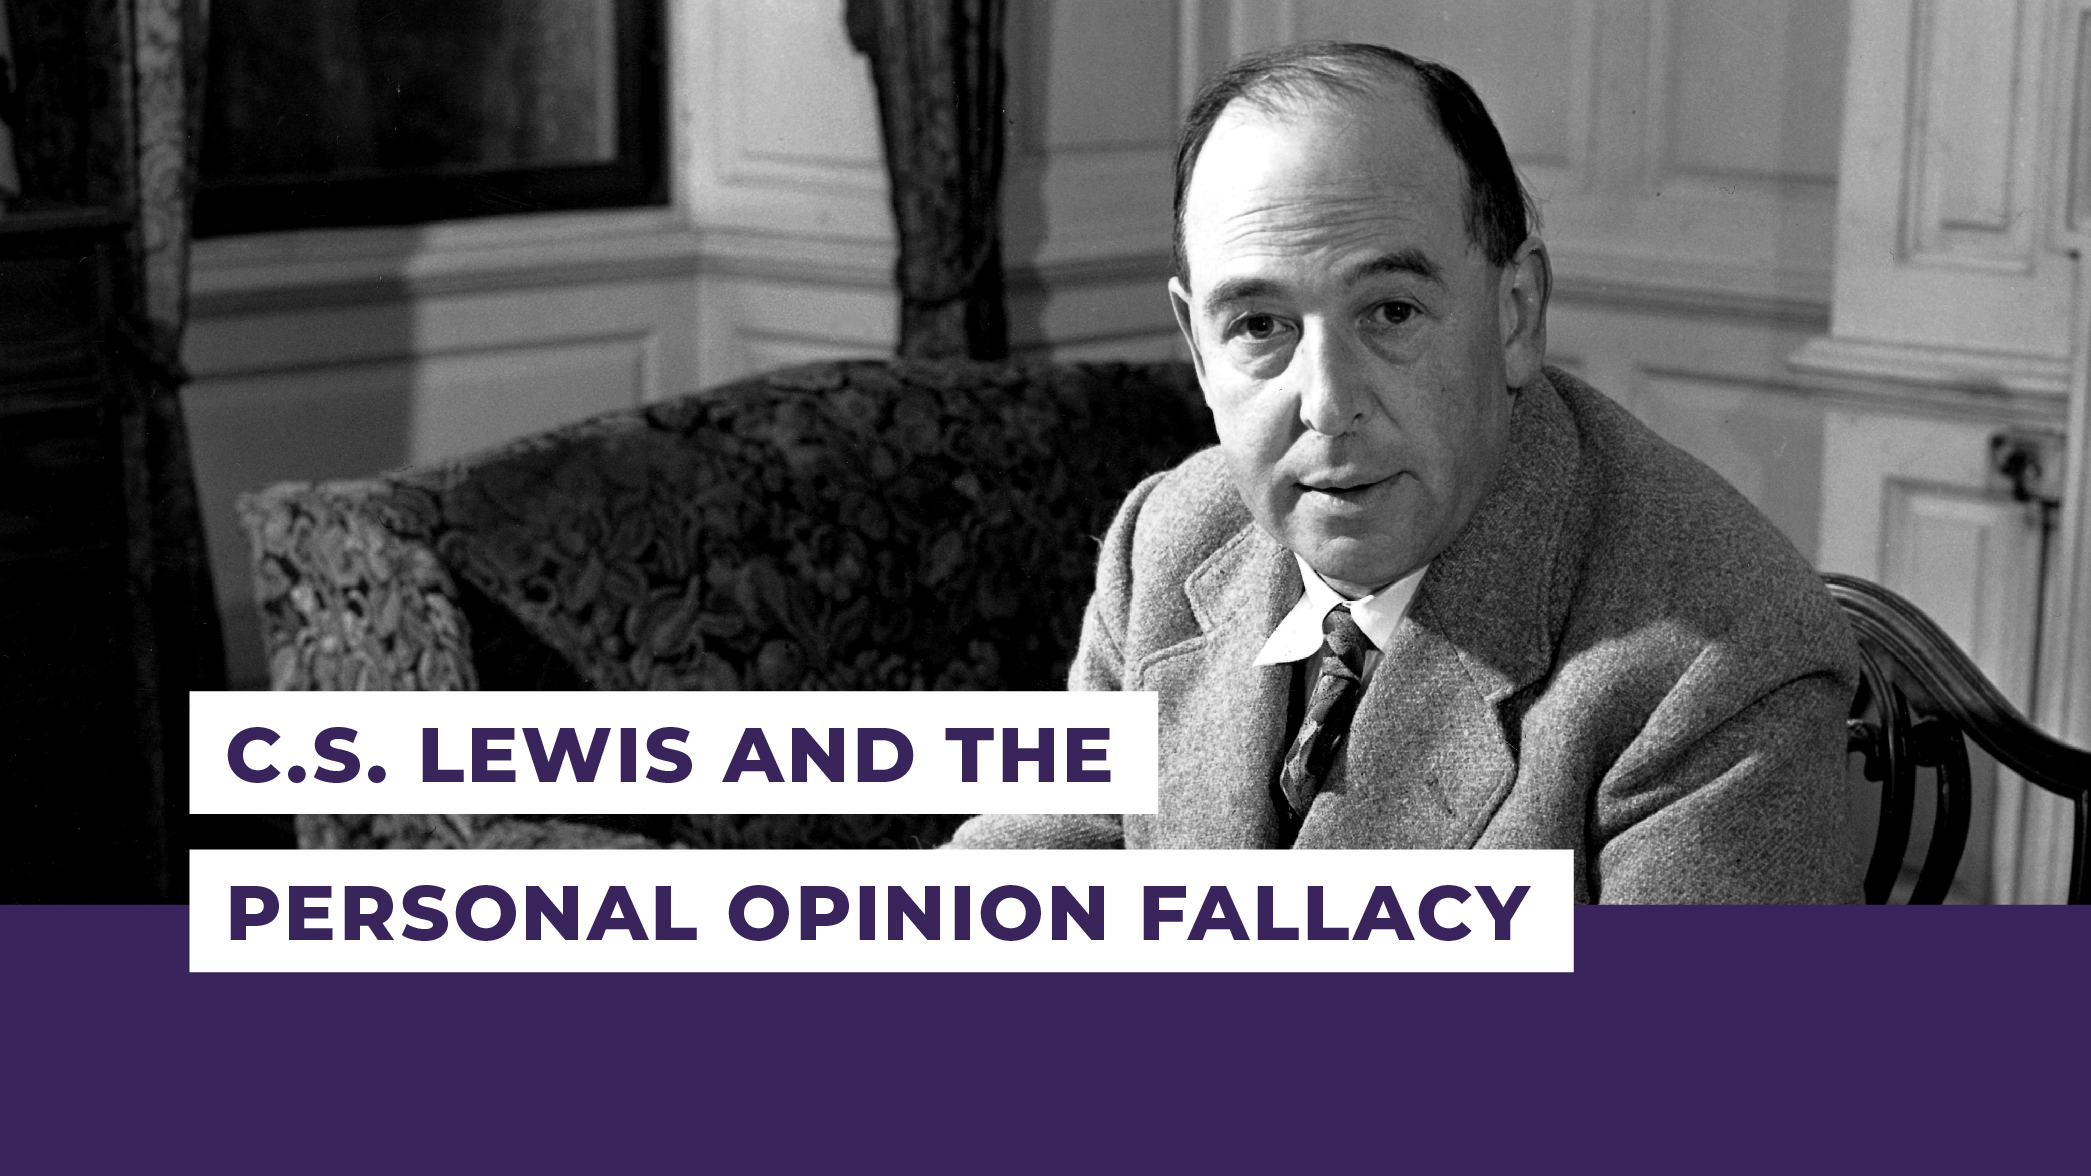 C.S. Lewis and the Personal Opinion Fallacy